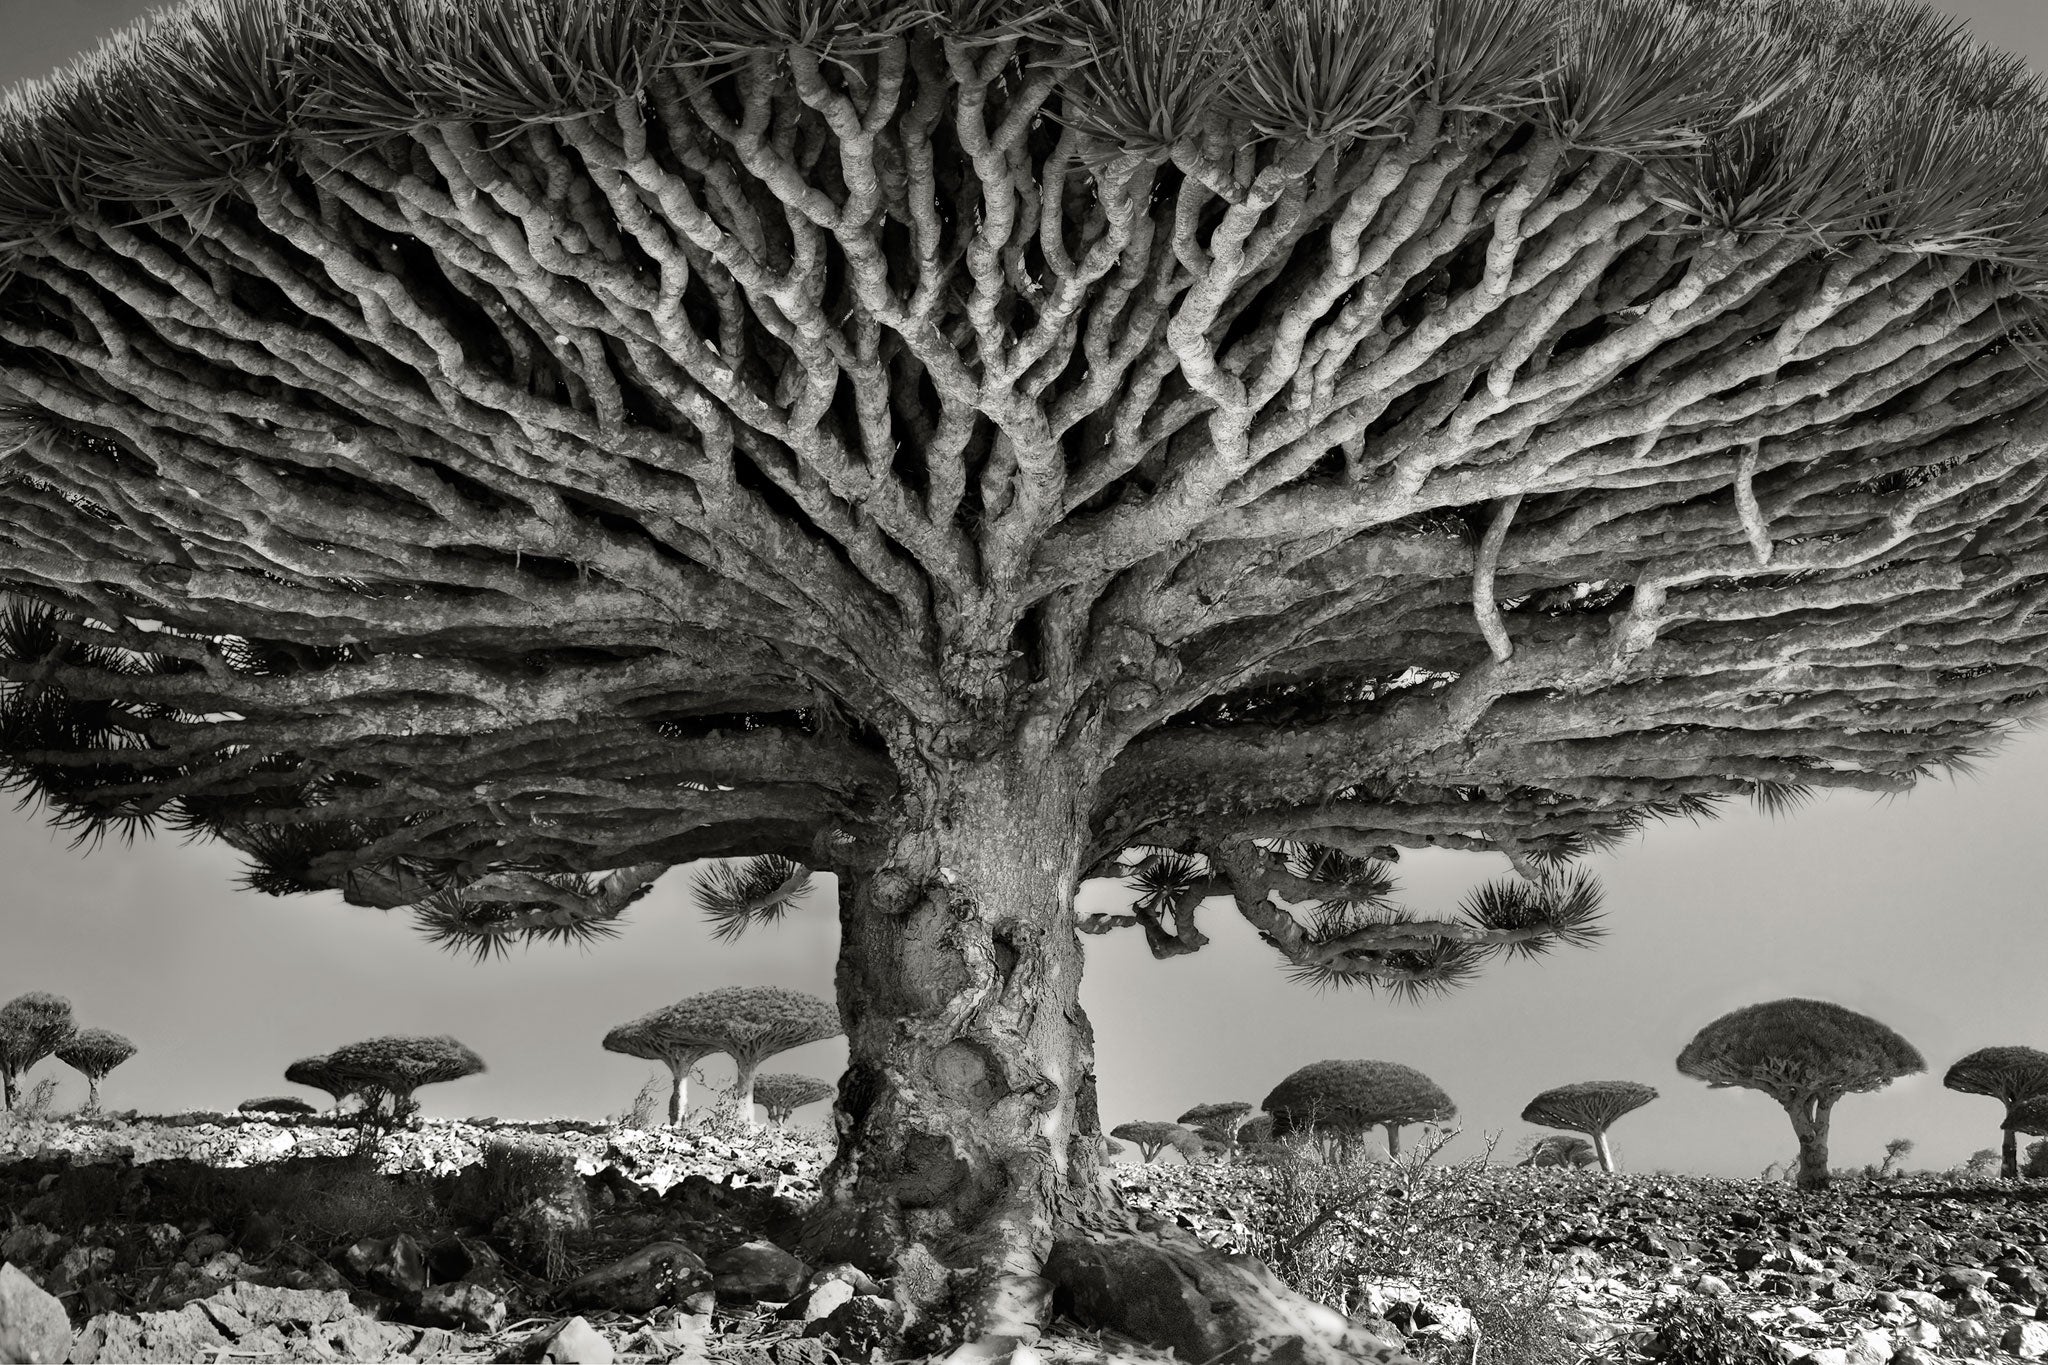 'Heart of the Dragon': This tree can be found in Socotra, an island off the Horn of Africa, and bleeds a scarlet sap when its trunk is cut